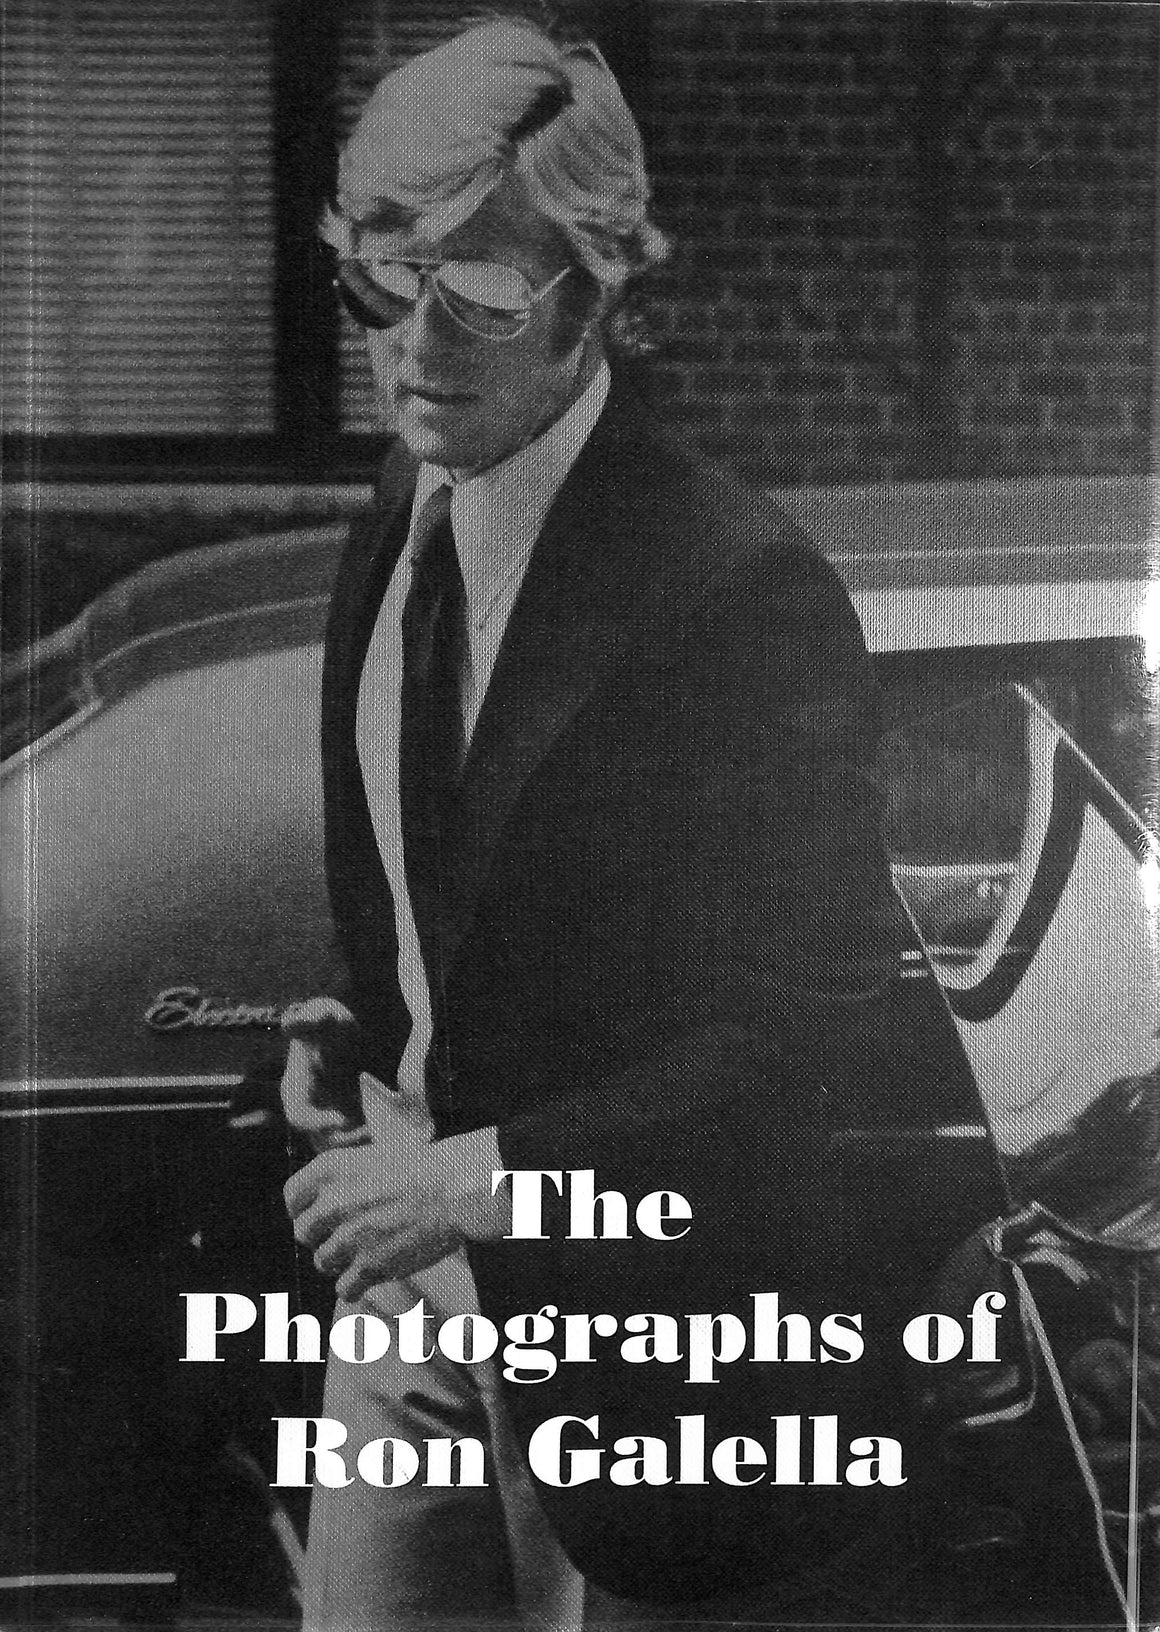 "The Photographs Of Ron Galella 1965-1989" 2003 (SOLD)